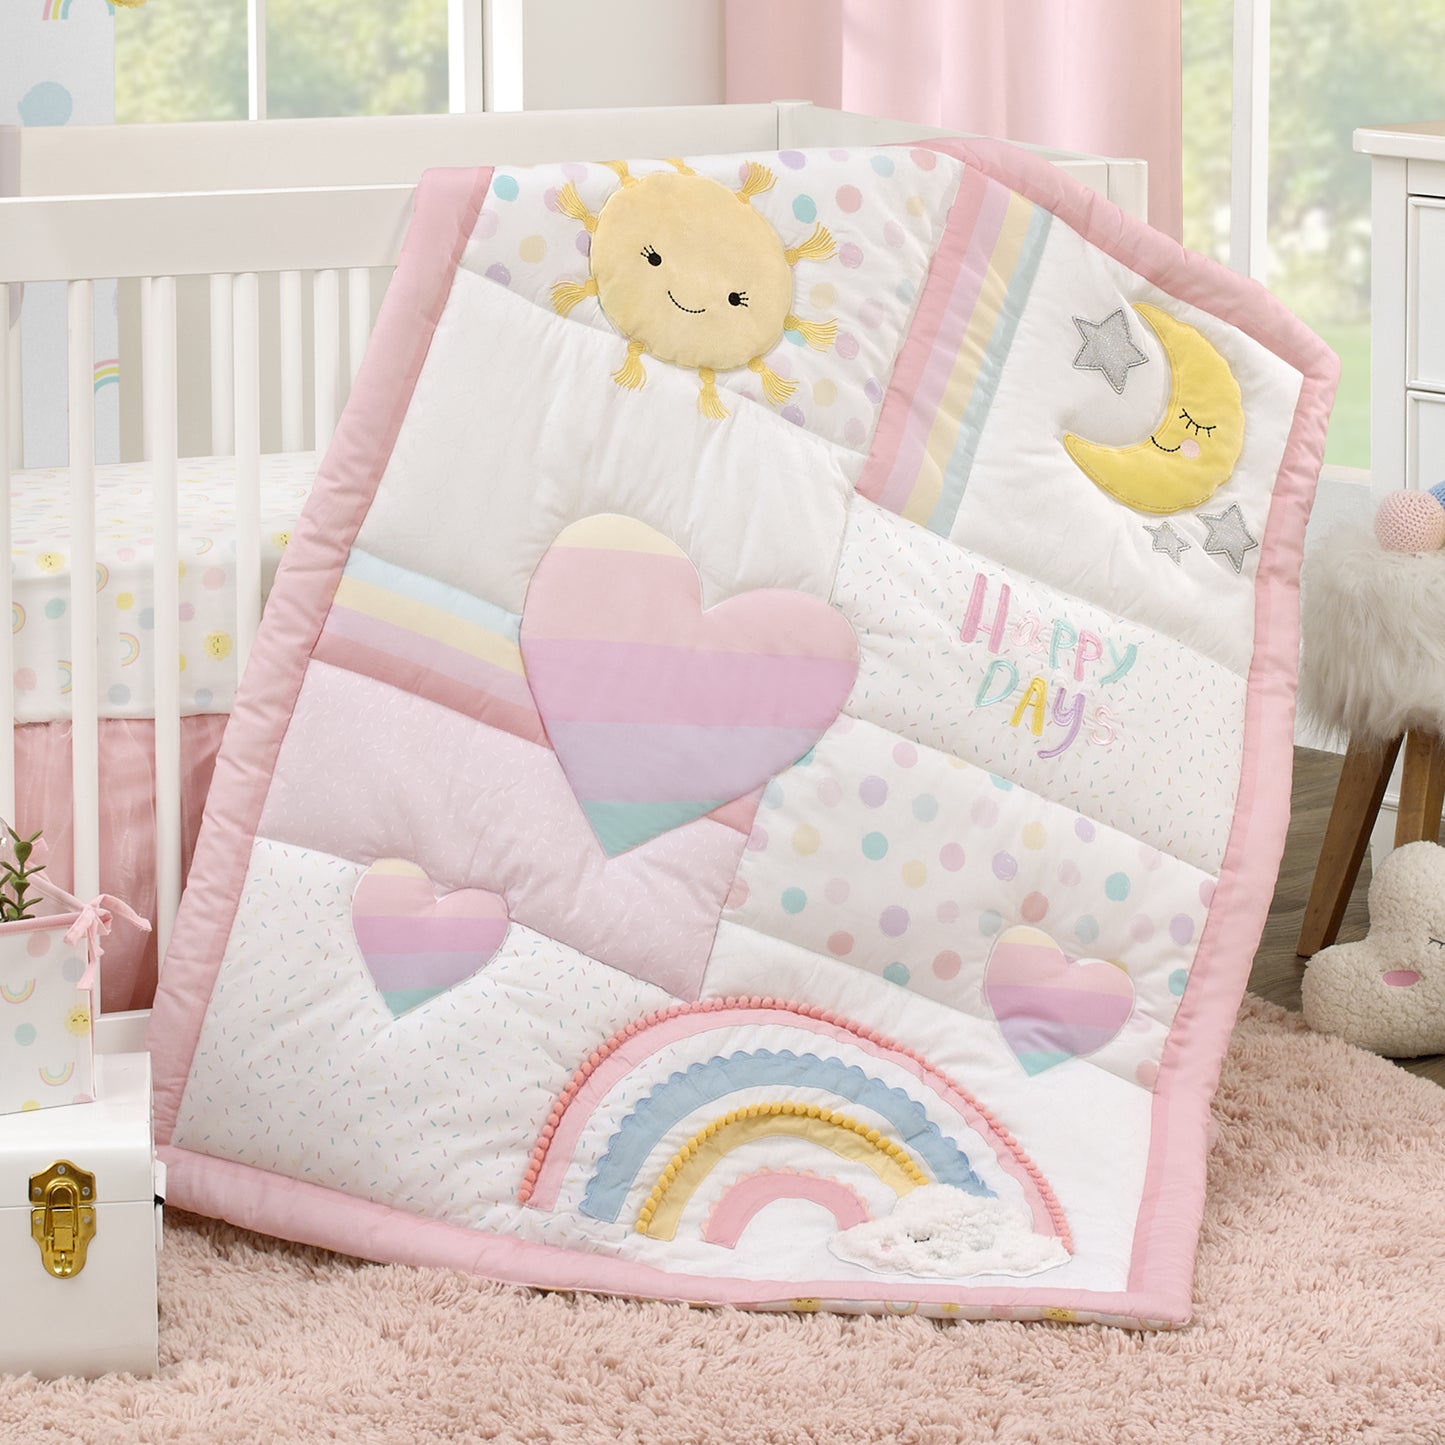 NoJo Happy Days Pink, White, and Yellow Rainbows and Sunshine 4 Piece Nursery Crib Bedding Set - Comforter, 100% Cotton Fitted Crib Sheet, Crib Skirt and Reversible Storage